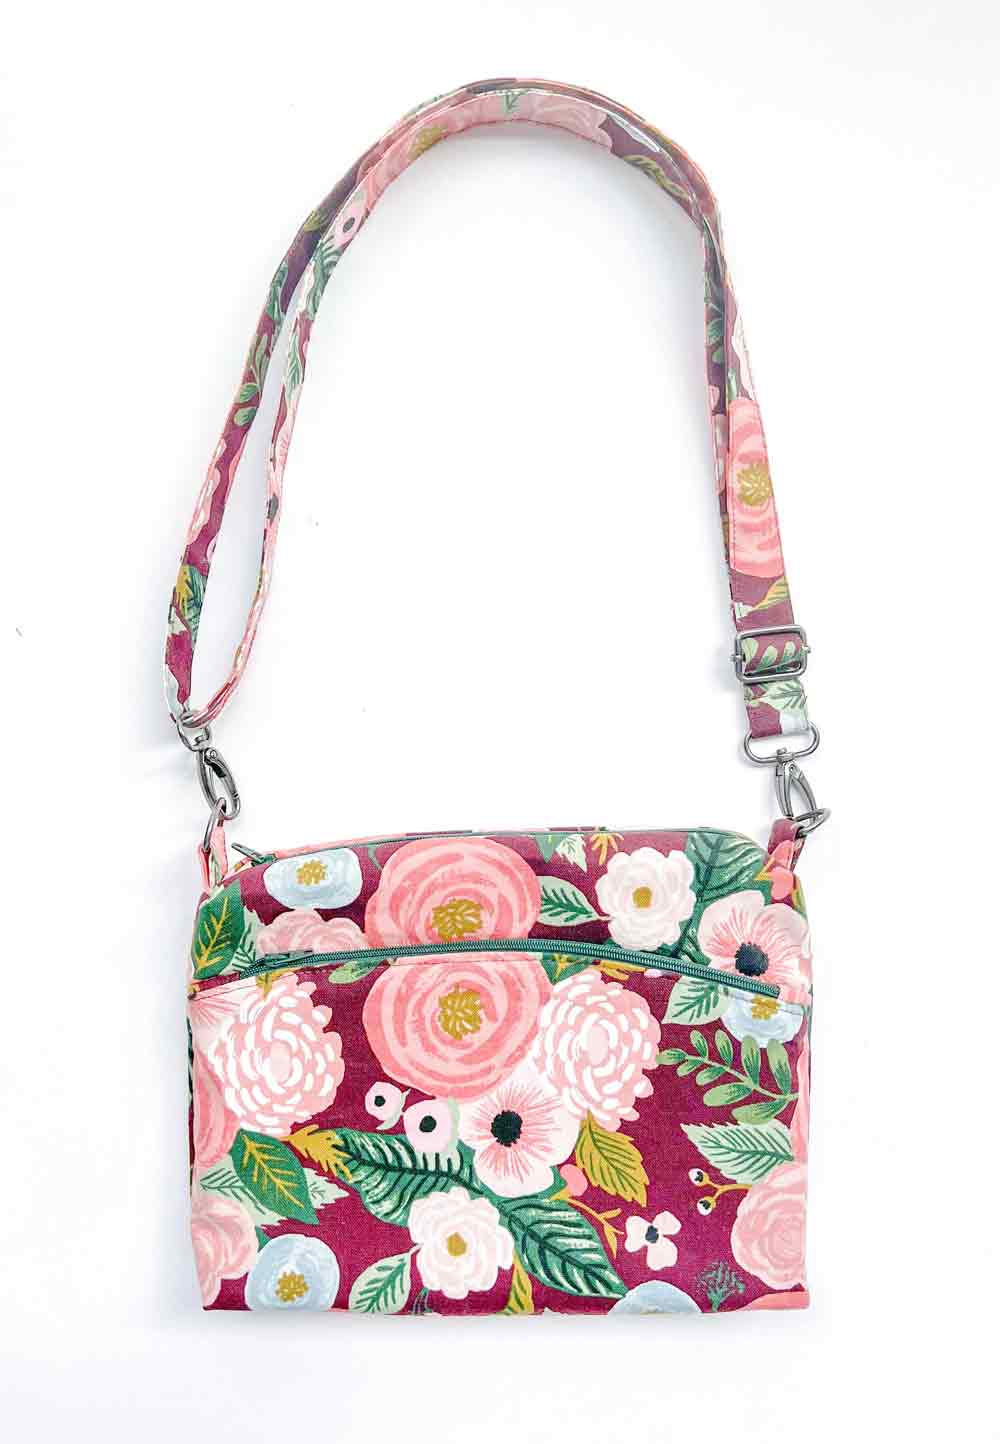 finished crossbody bag with removable and adjustable bag strap